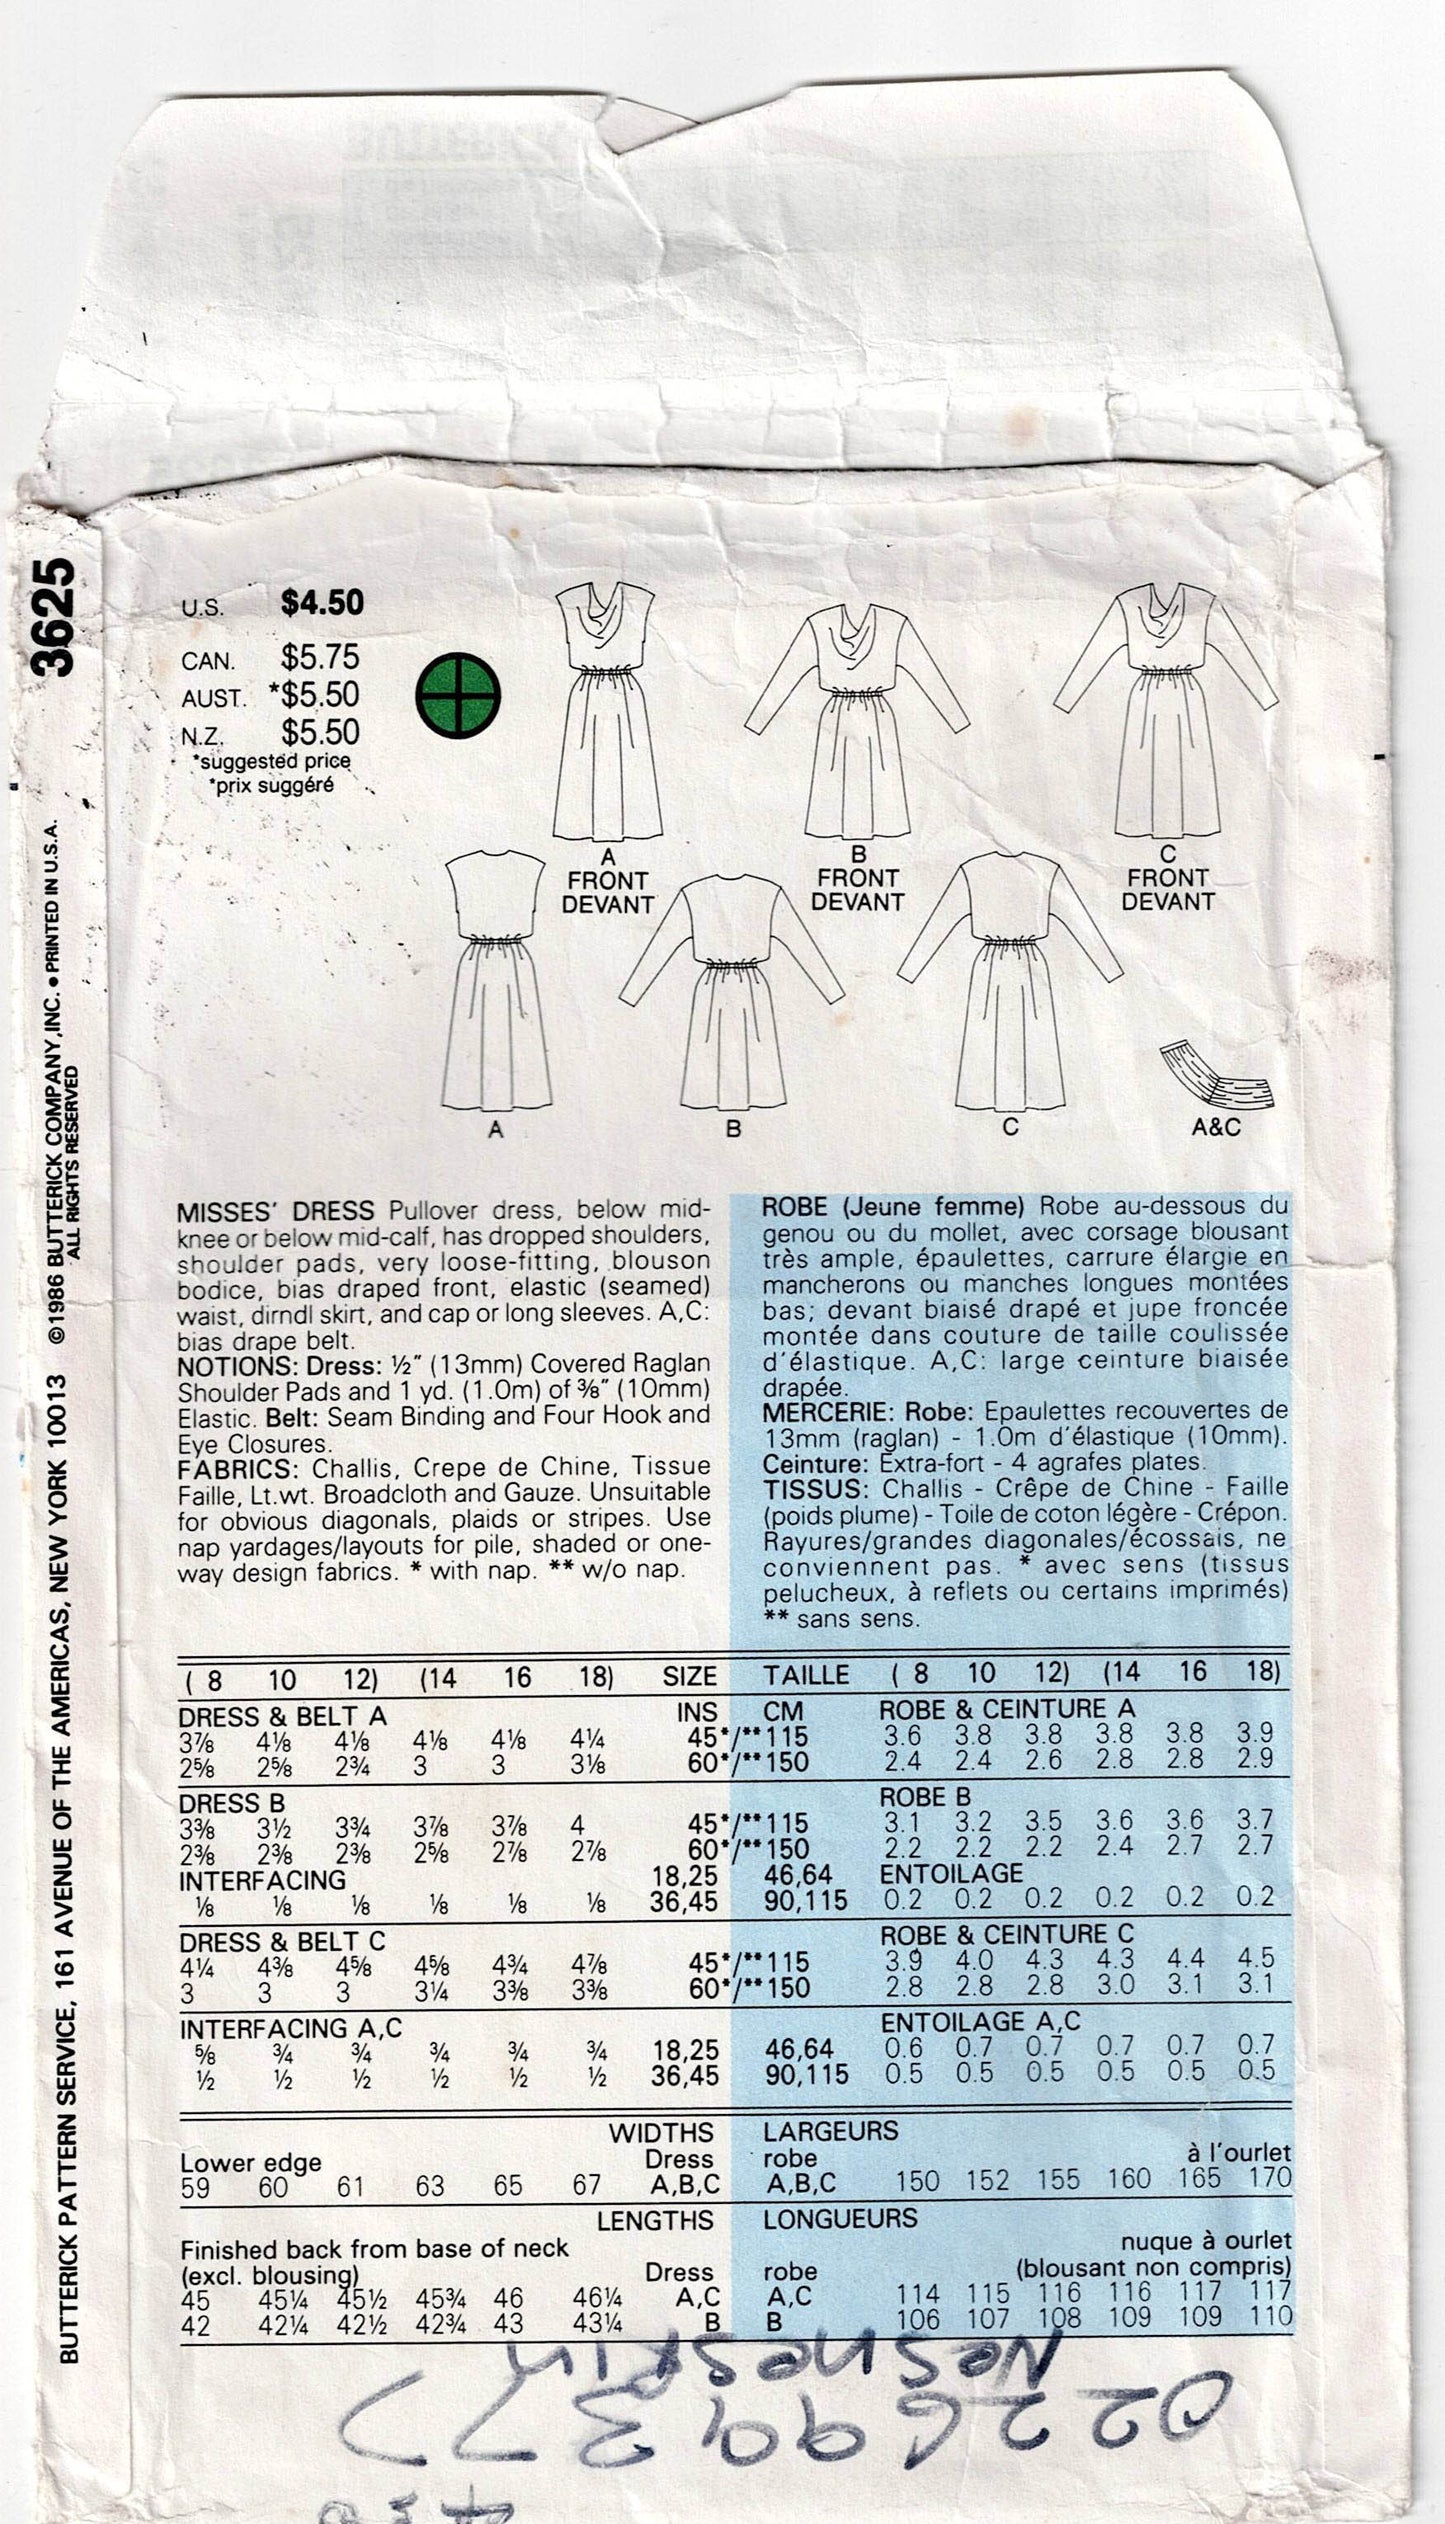 Butterick 3625 Womens Blouson Dress with Draped Neckline & Ruched Waist 1980s Vintage Sewing Pattern Size 14 - 18 UNCUT Factory Folded